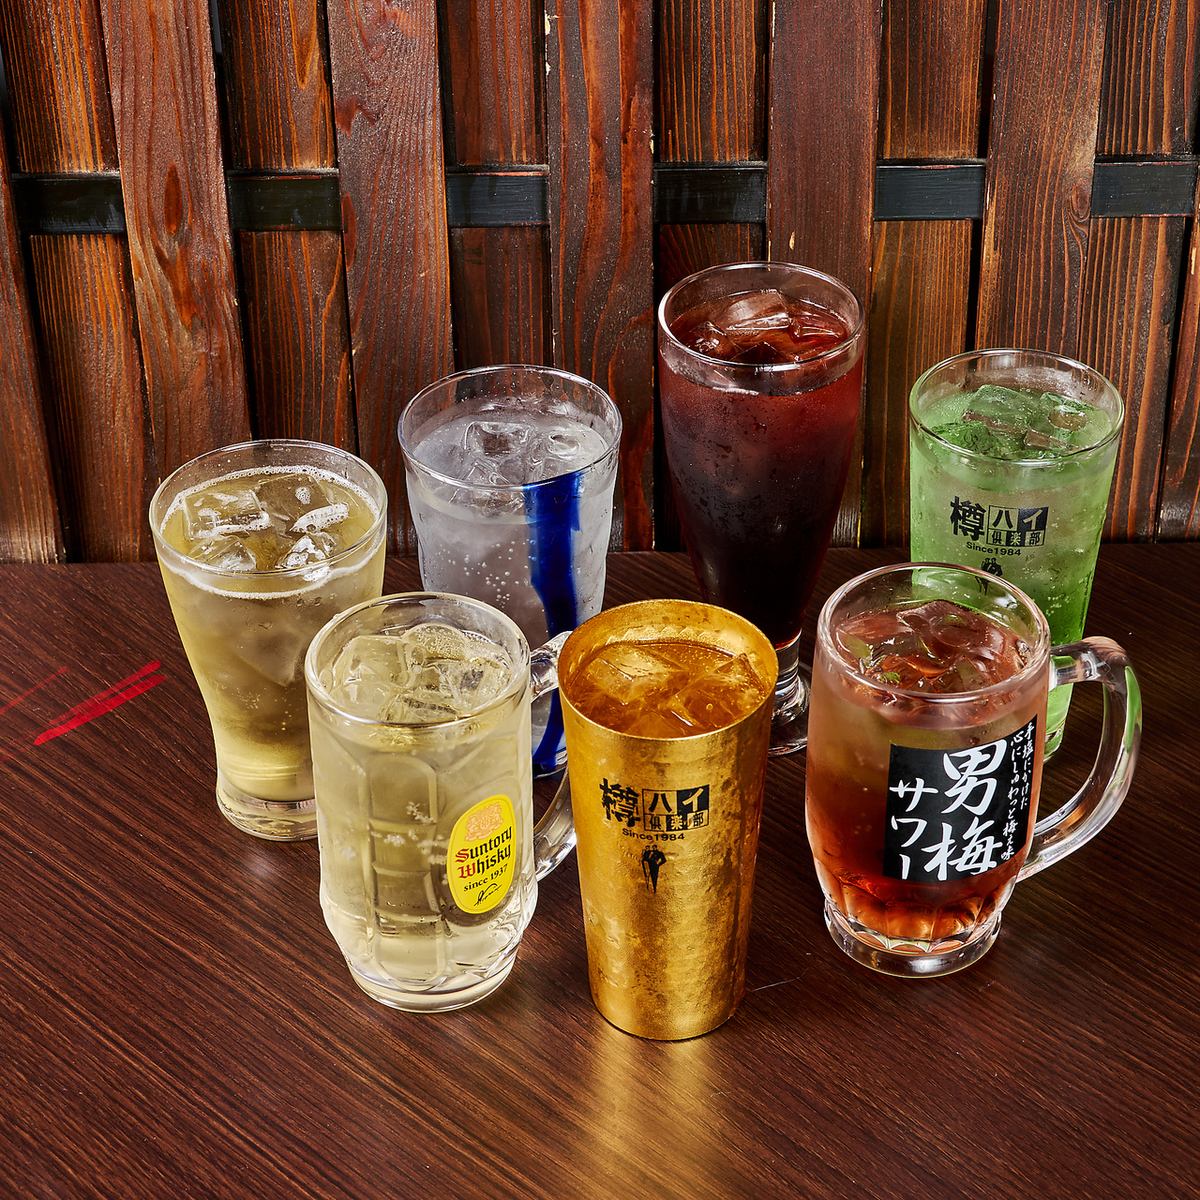 After midnight, it's bar time and you can enjoy drinks until late at night.